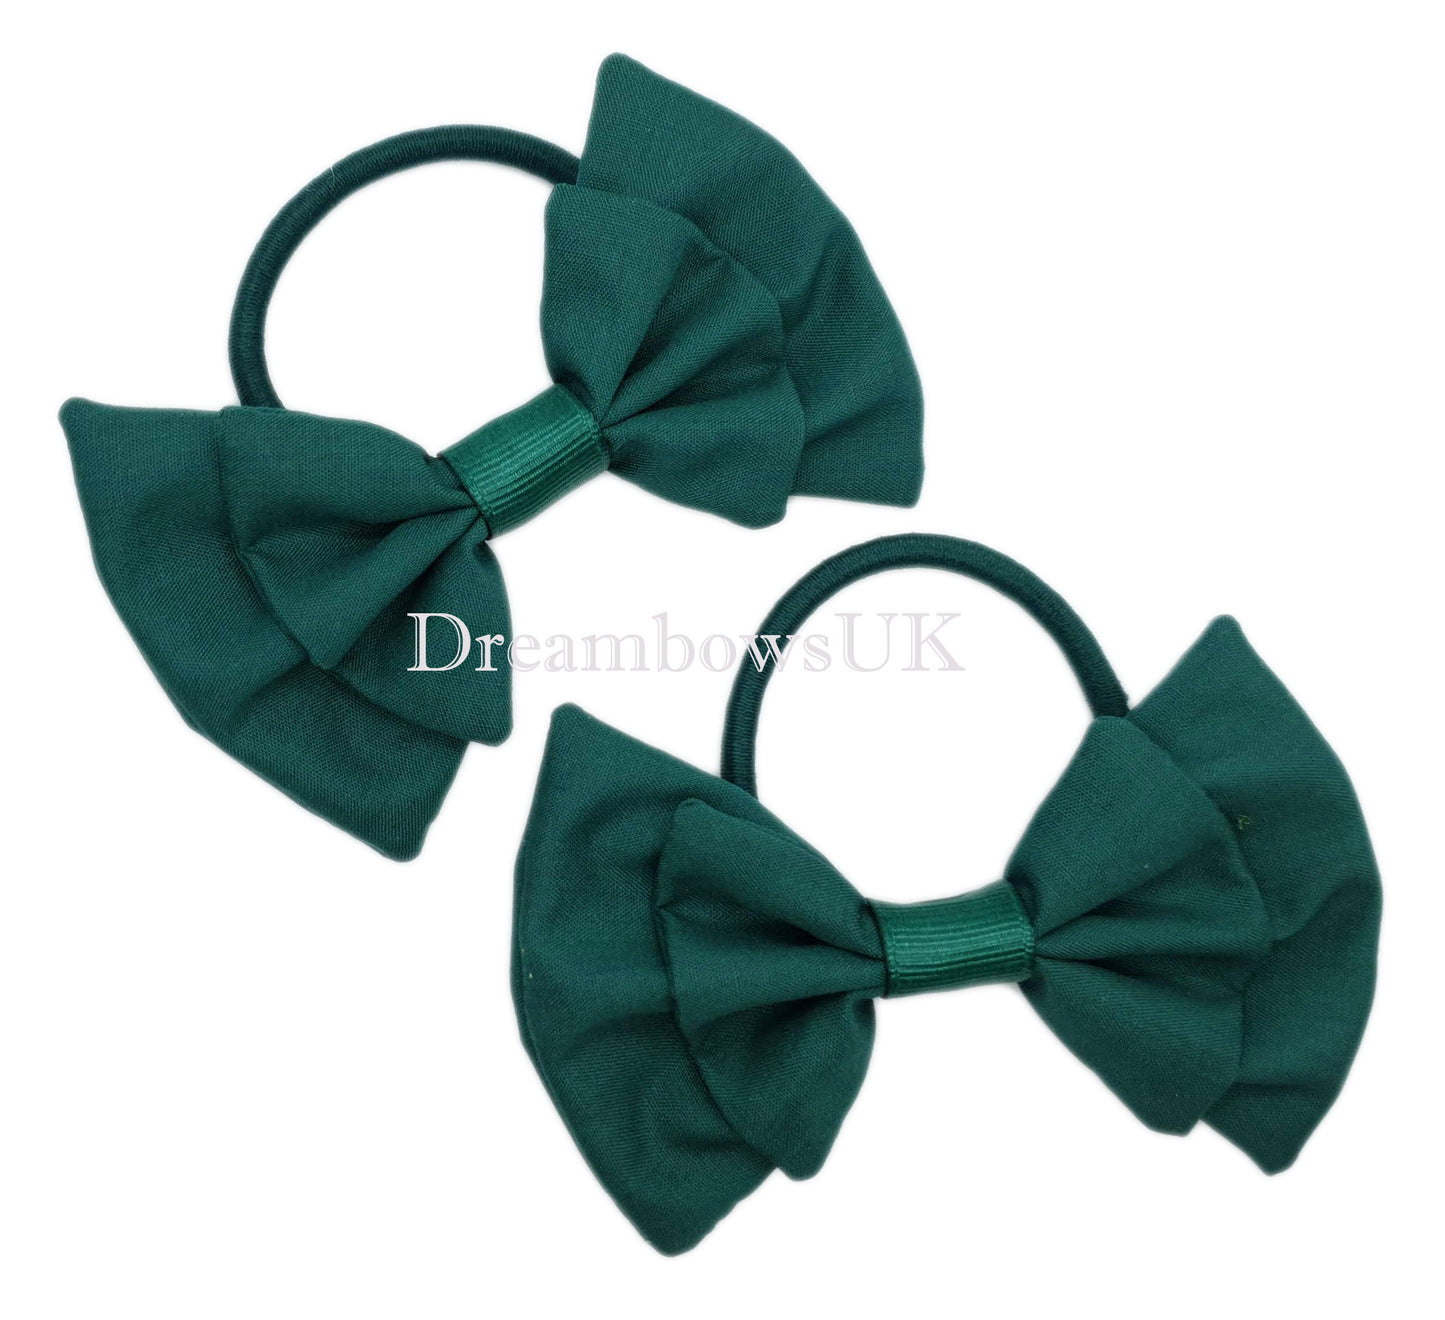 Bottle green hair accessories for school uniforms to match